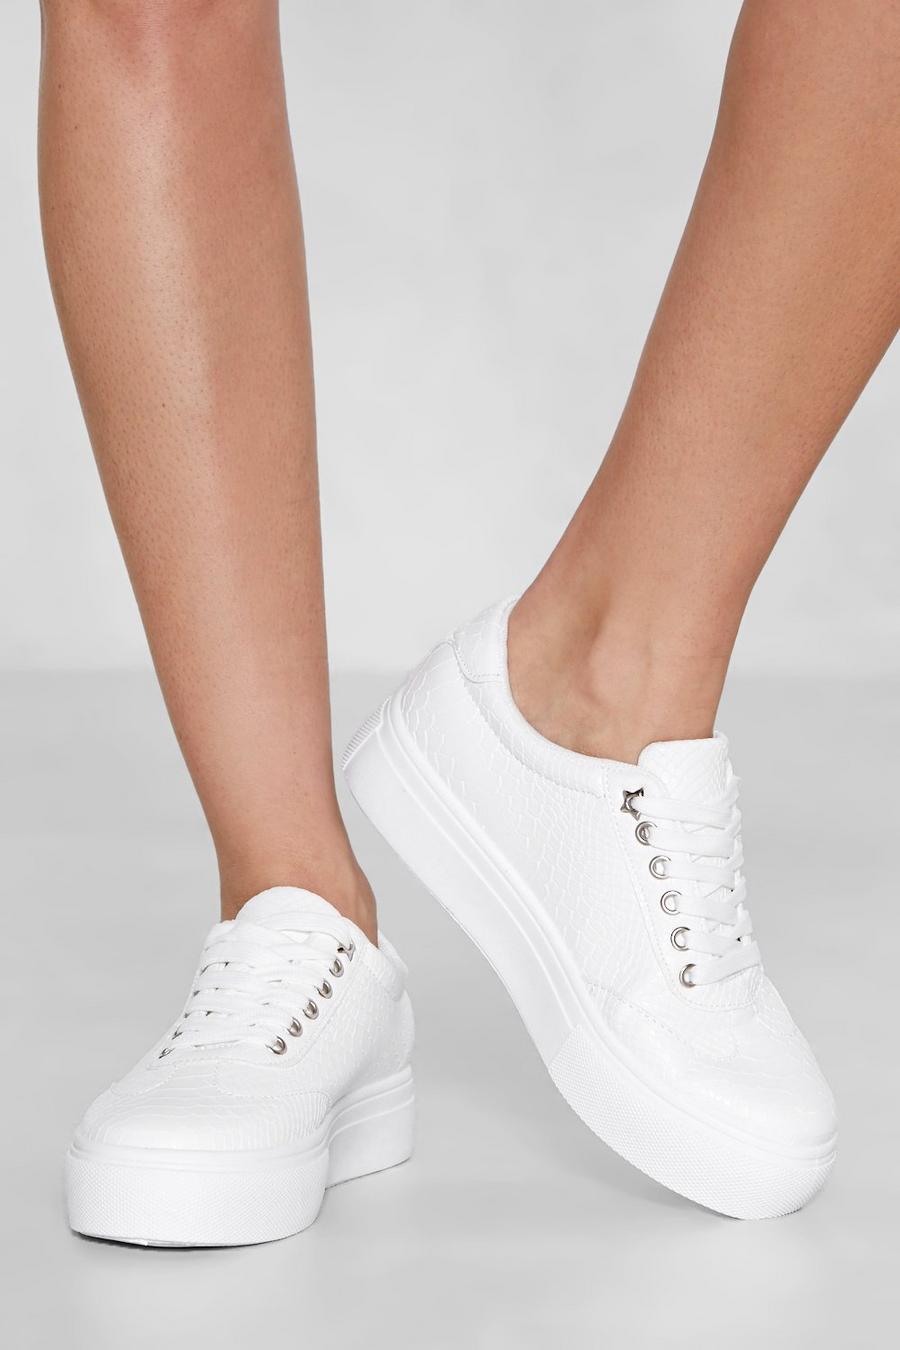 Croc With Me Faux Leather Platform Sneaker